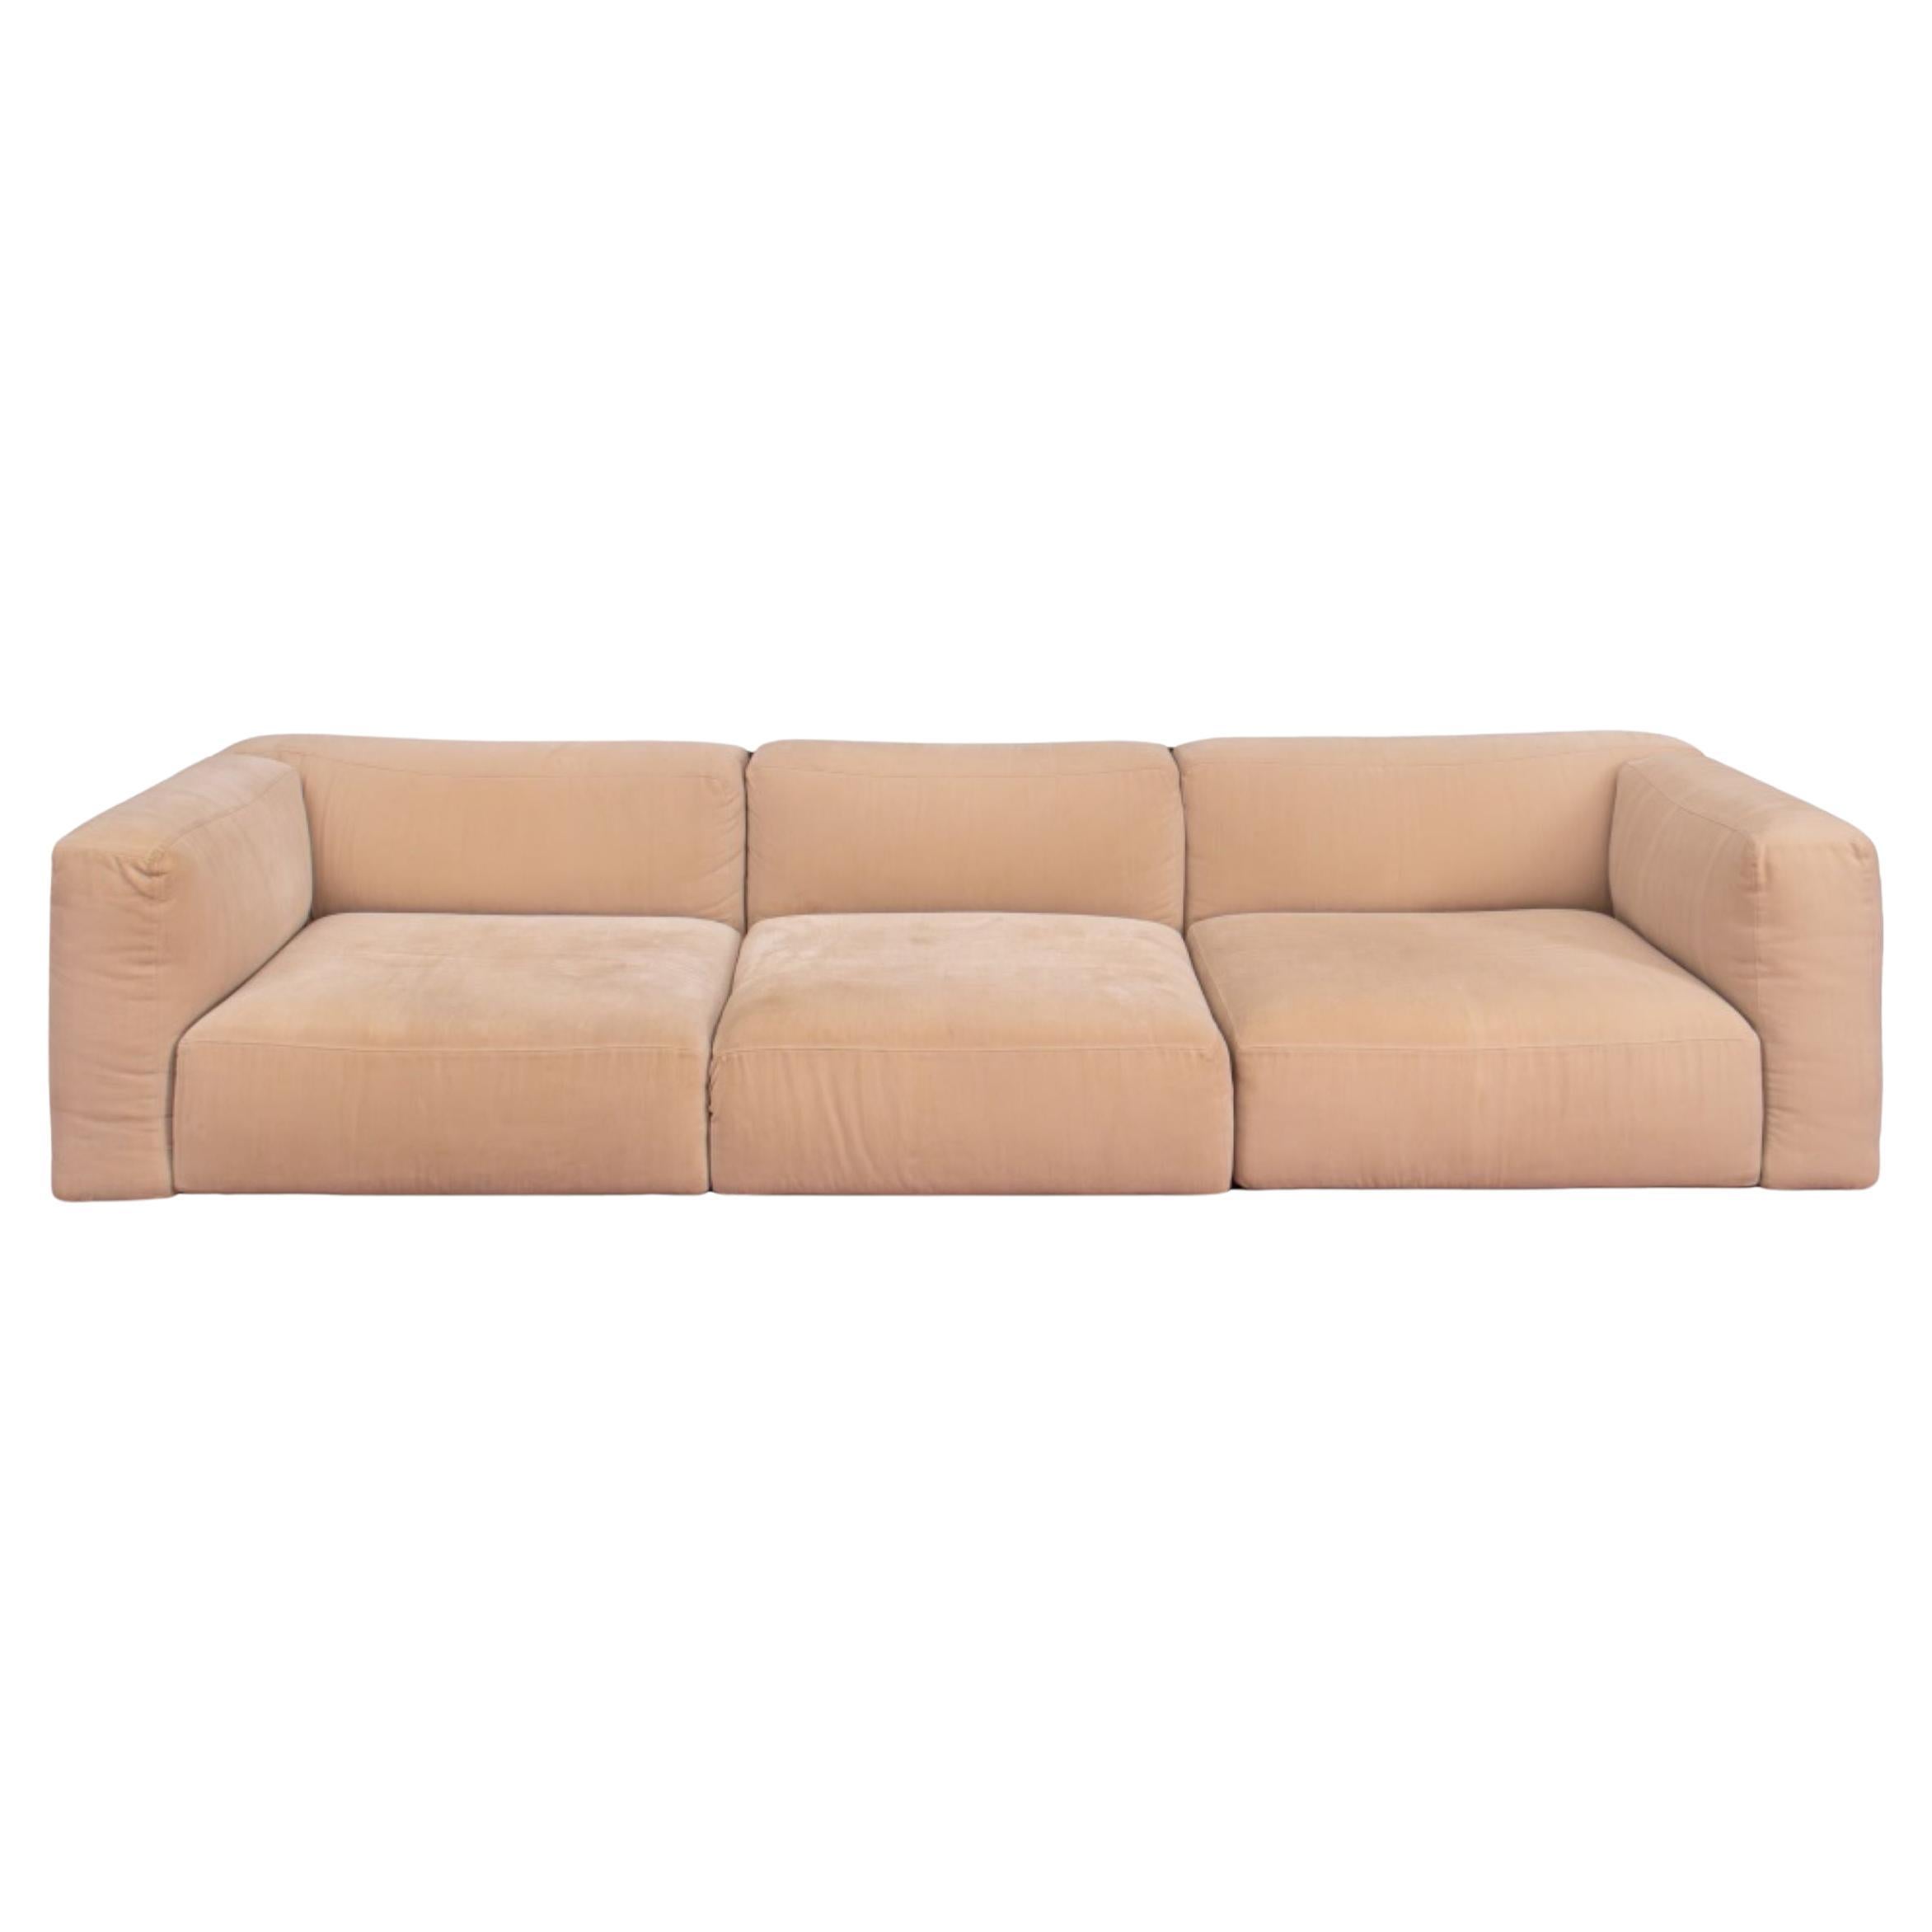 Piero Lissoni for Cassina Mex Sectional Sofa For Sale